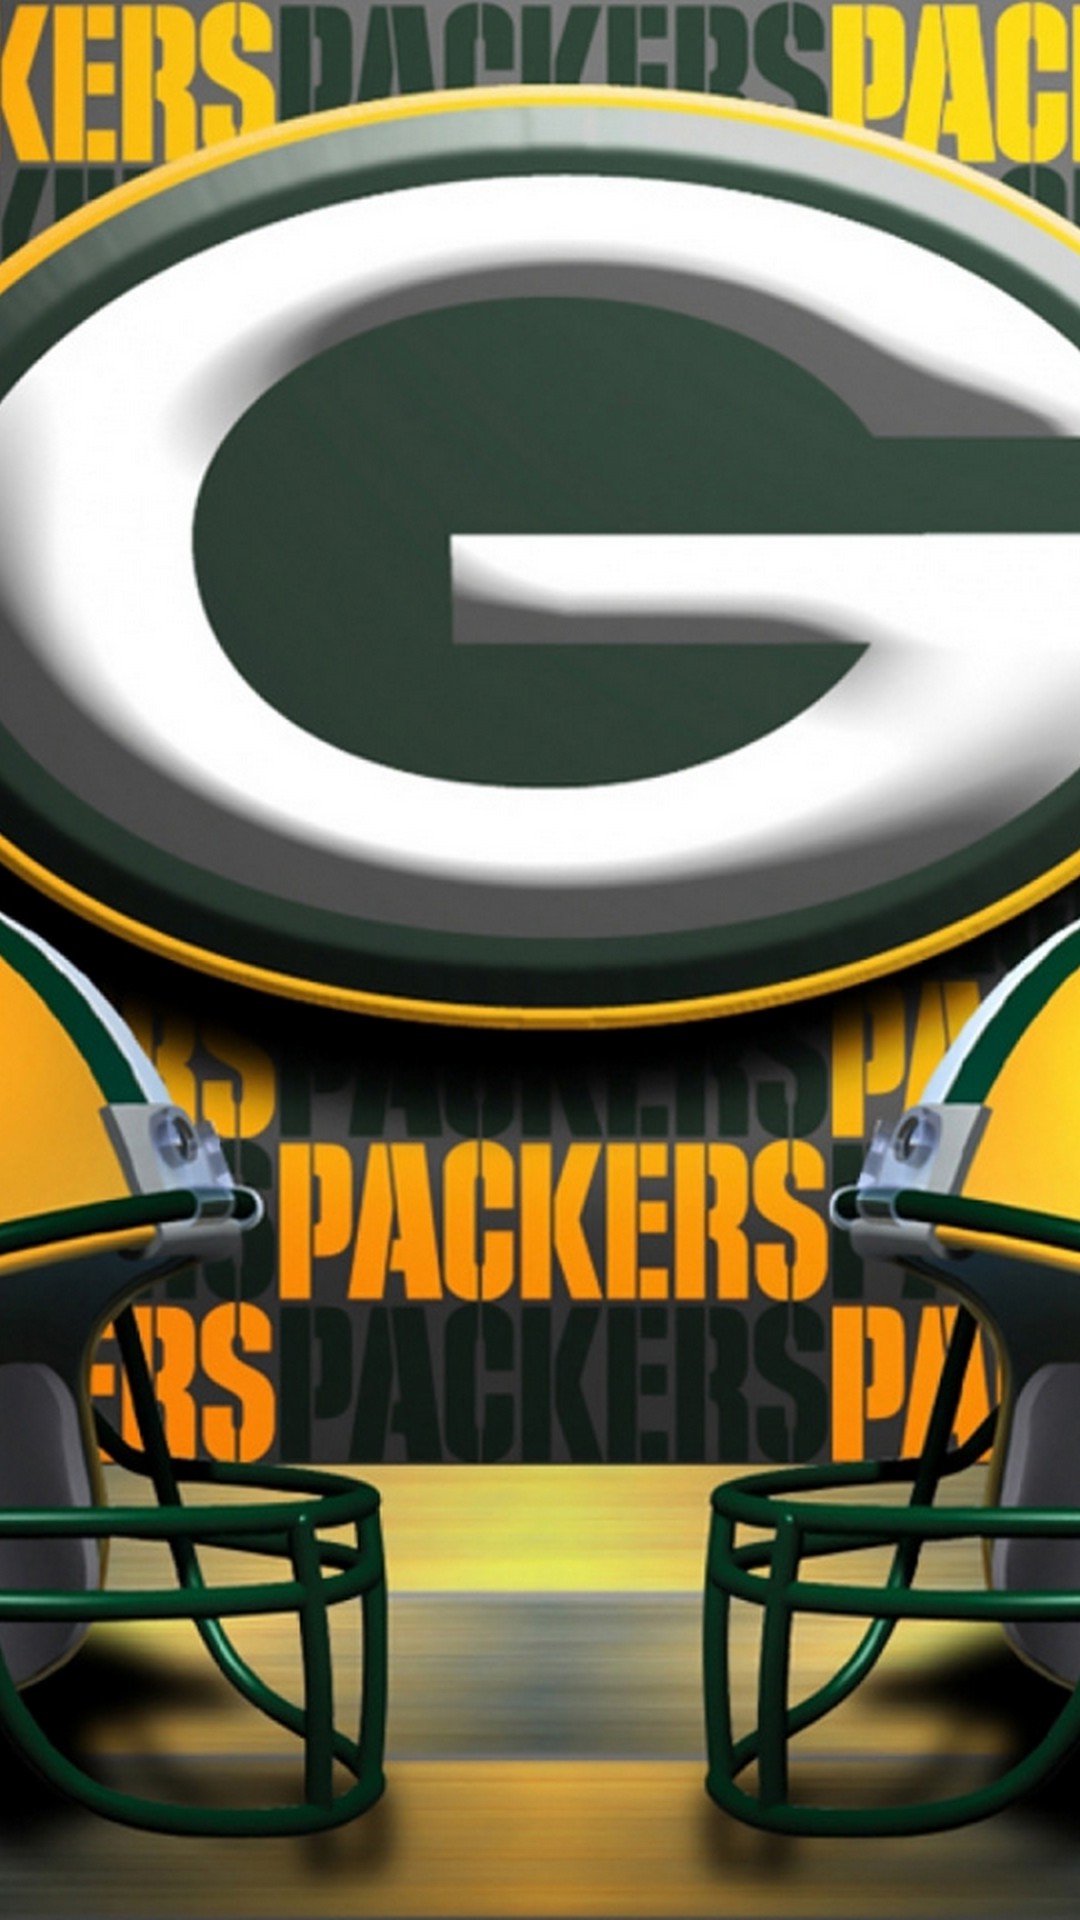 Green Bay Packers iPhone 7 Plus Wallpaper with high-resolution 1080x1920 pixel. Download and set as wallpaper for Apple iPhone X, XS Max, XR, 8, 7, 6, SE, iPad, Android